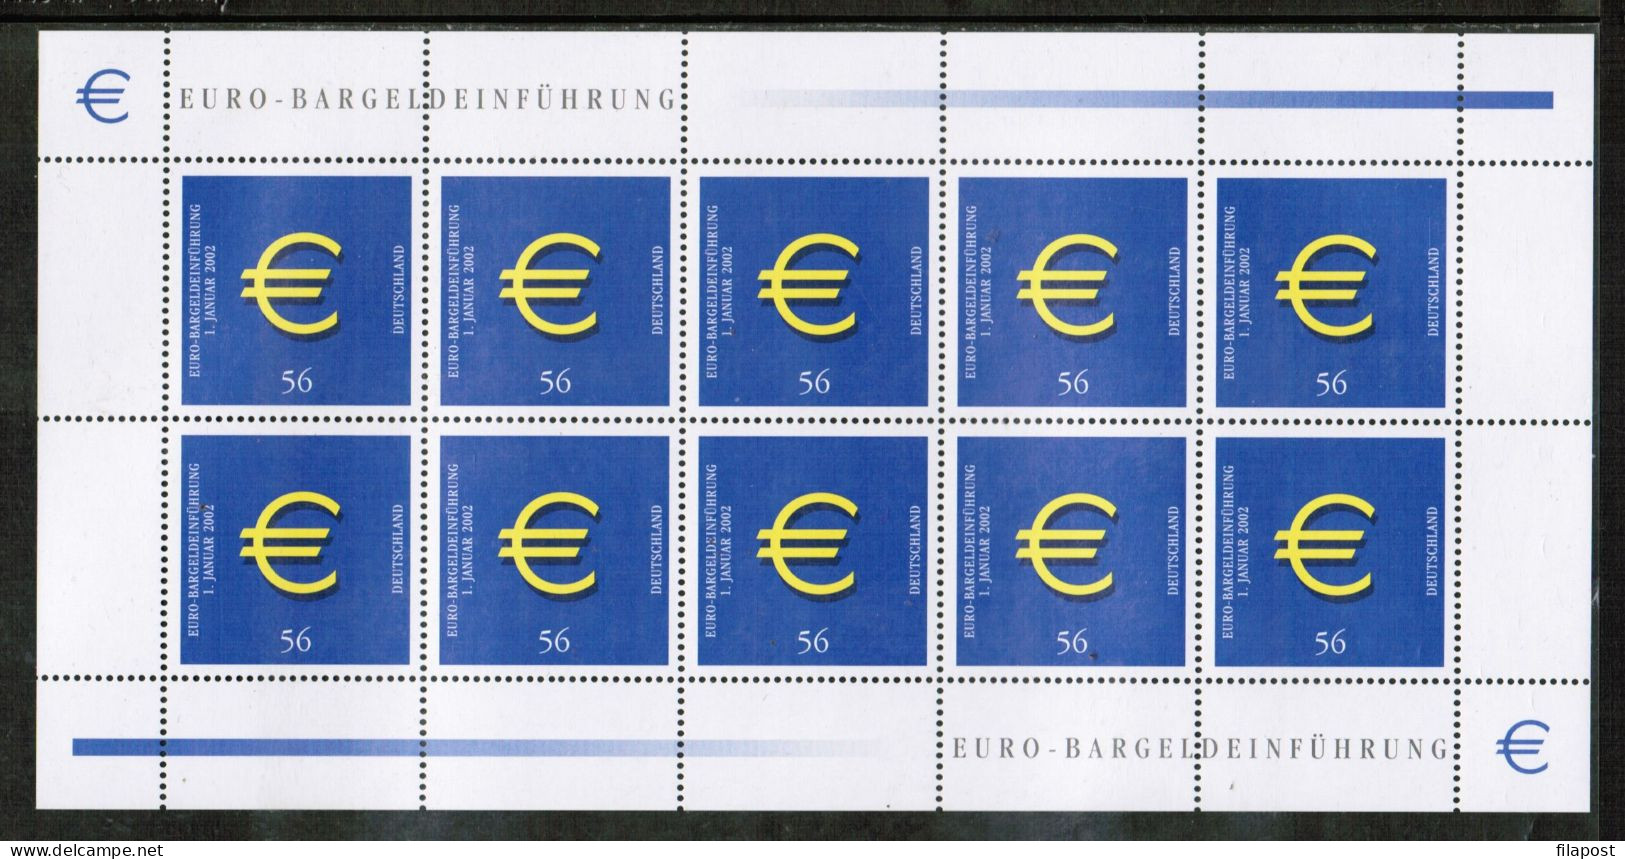 Germany 2002 / Michel 2234 Kb - 1 January 2002 Introduction Of Euro Cash - Sheet Of 10 Stamps MNH - Ungebraucht